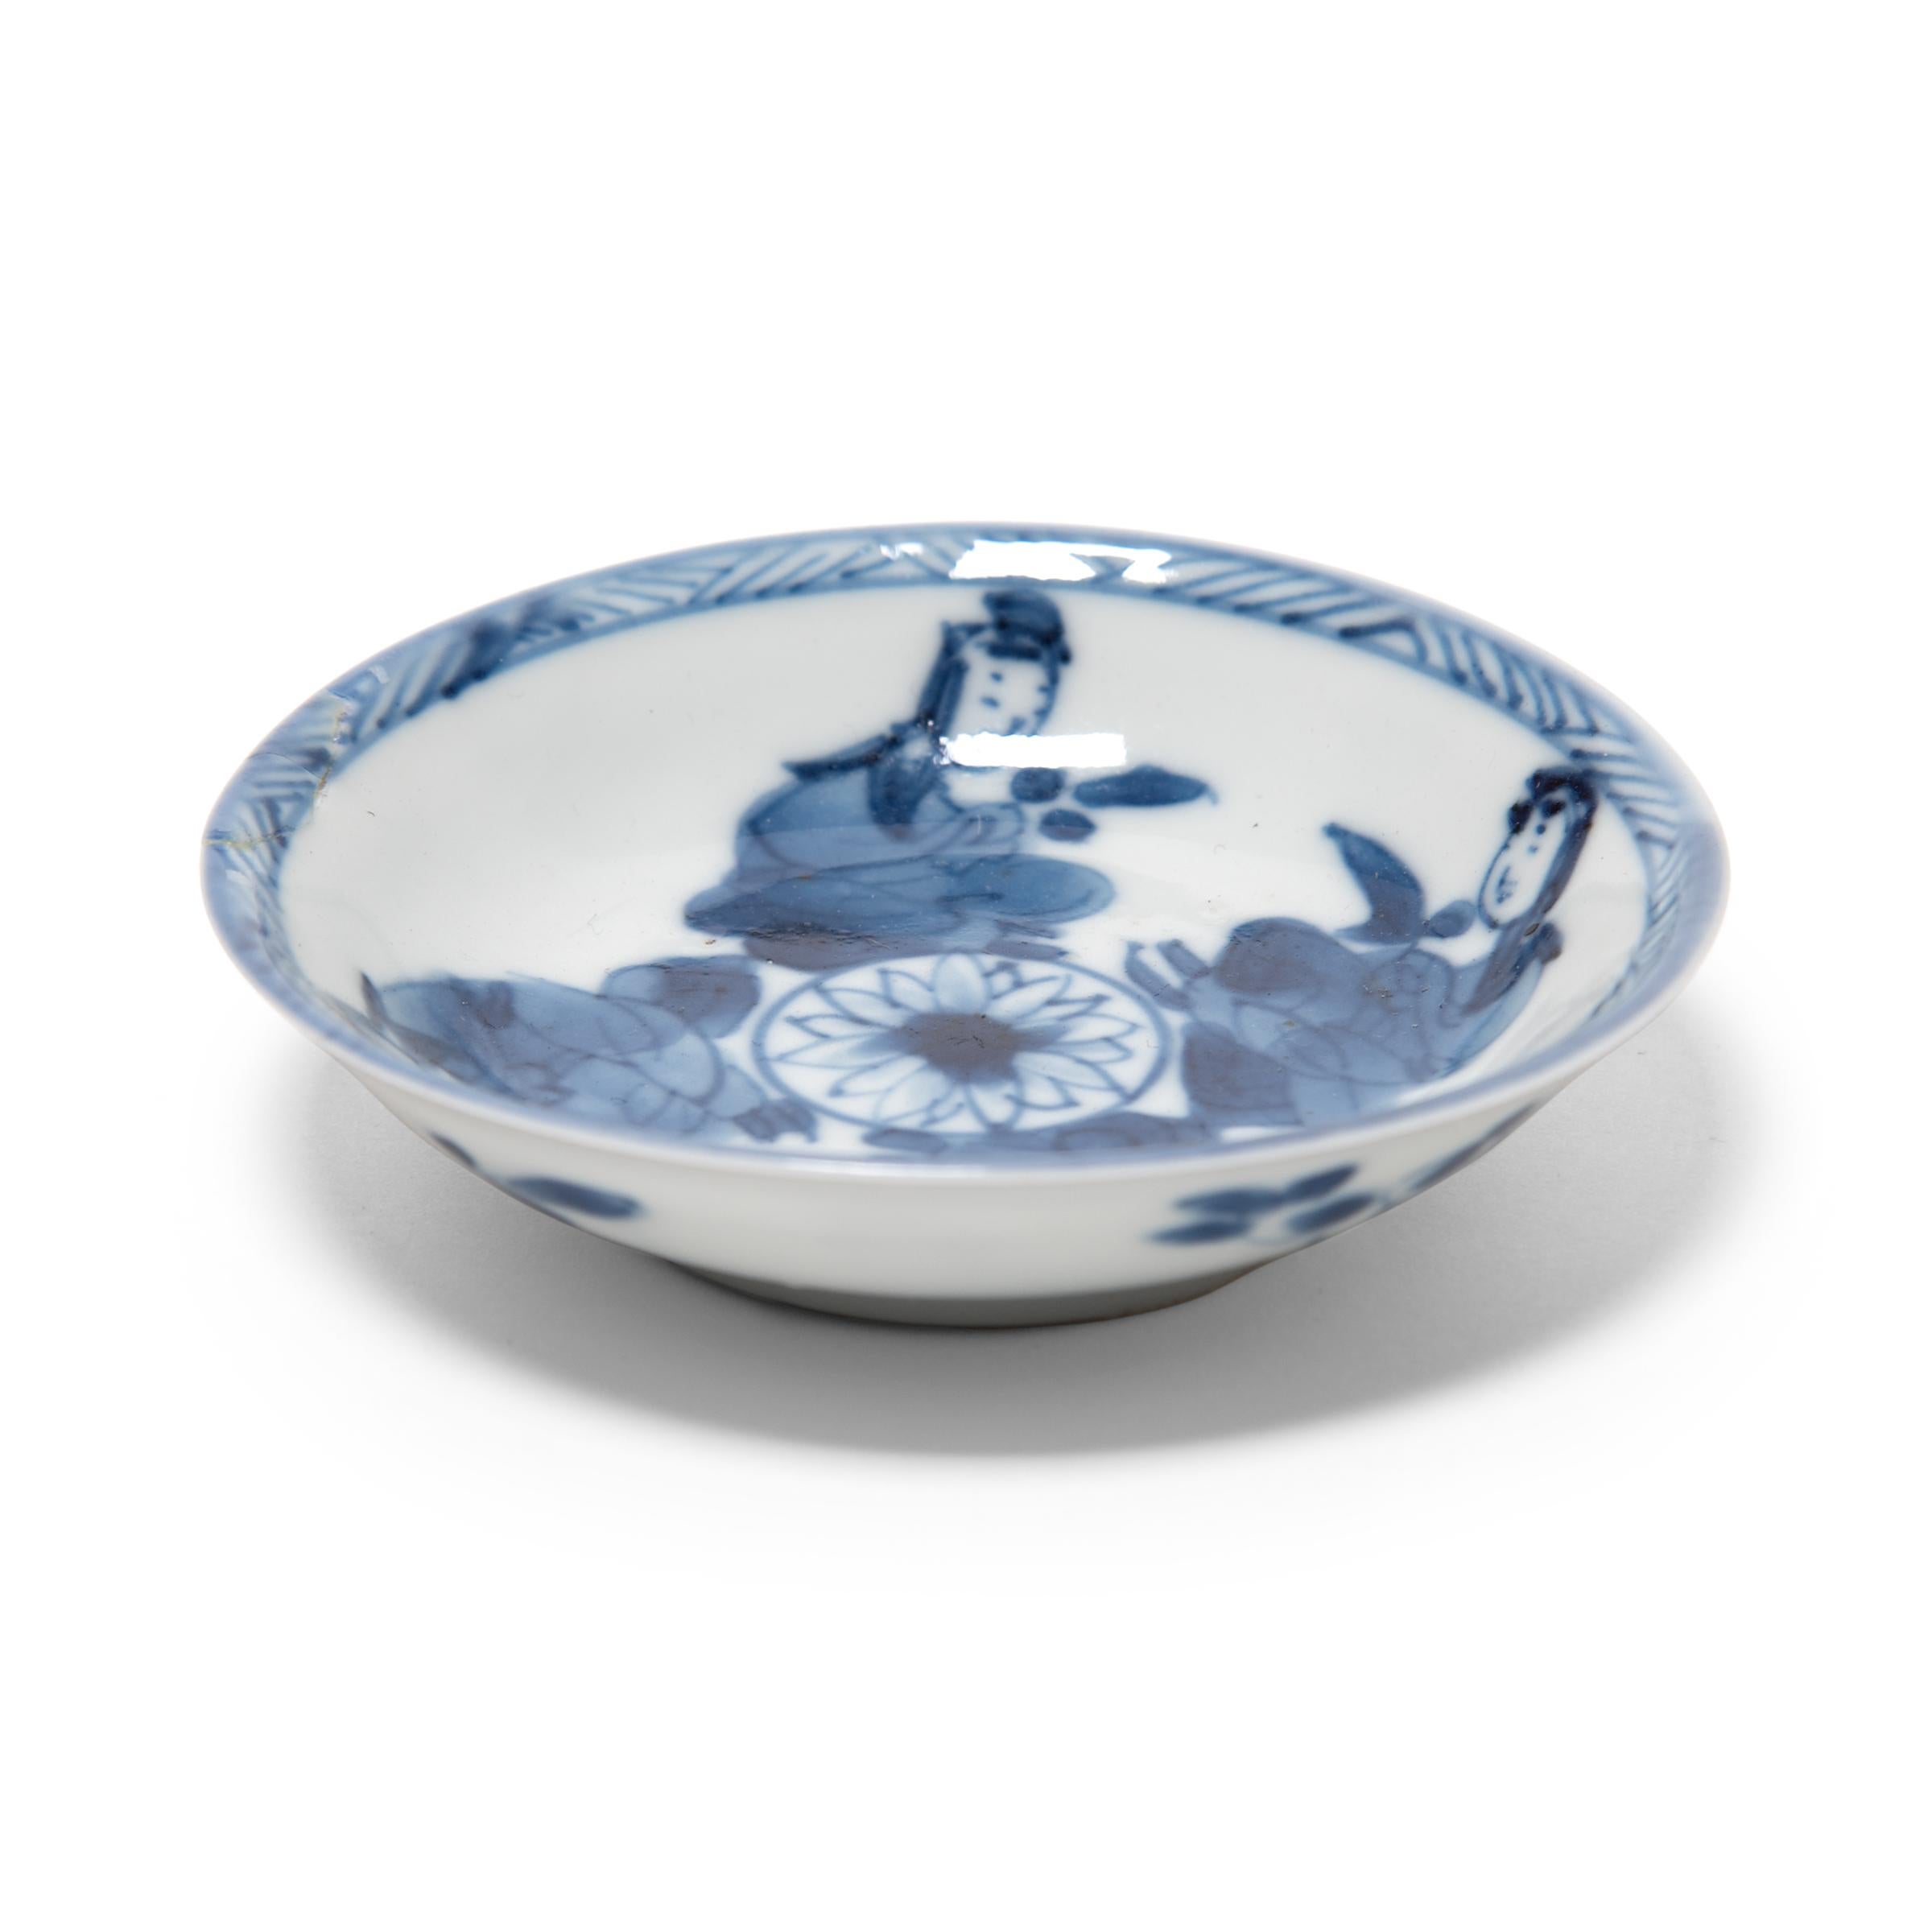 This 19th century porcelain saucer is a lovely example of Chinese blue-and-white ceramics. The petite dish is finely worked with thin walls and delicate brushwork of four attendants seated around a central lotus blossom.